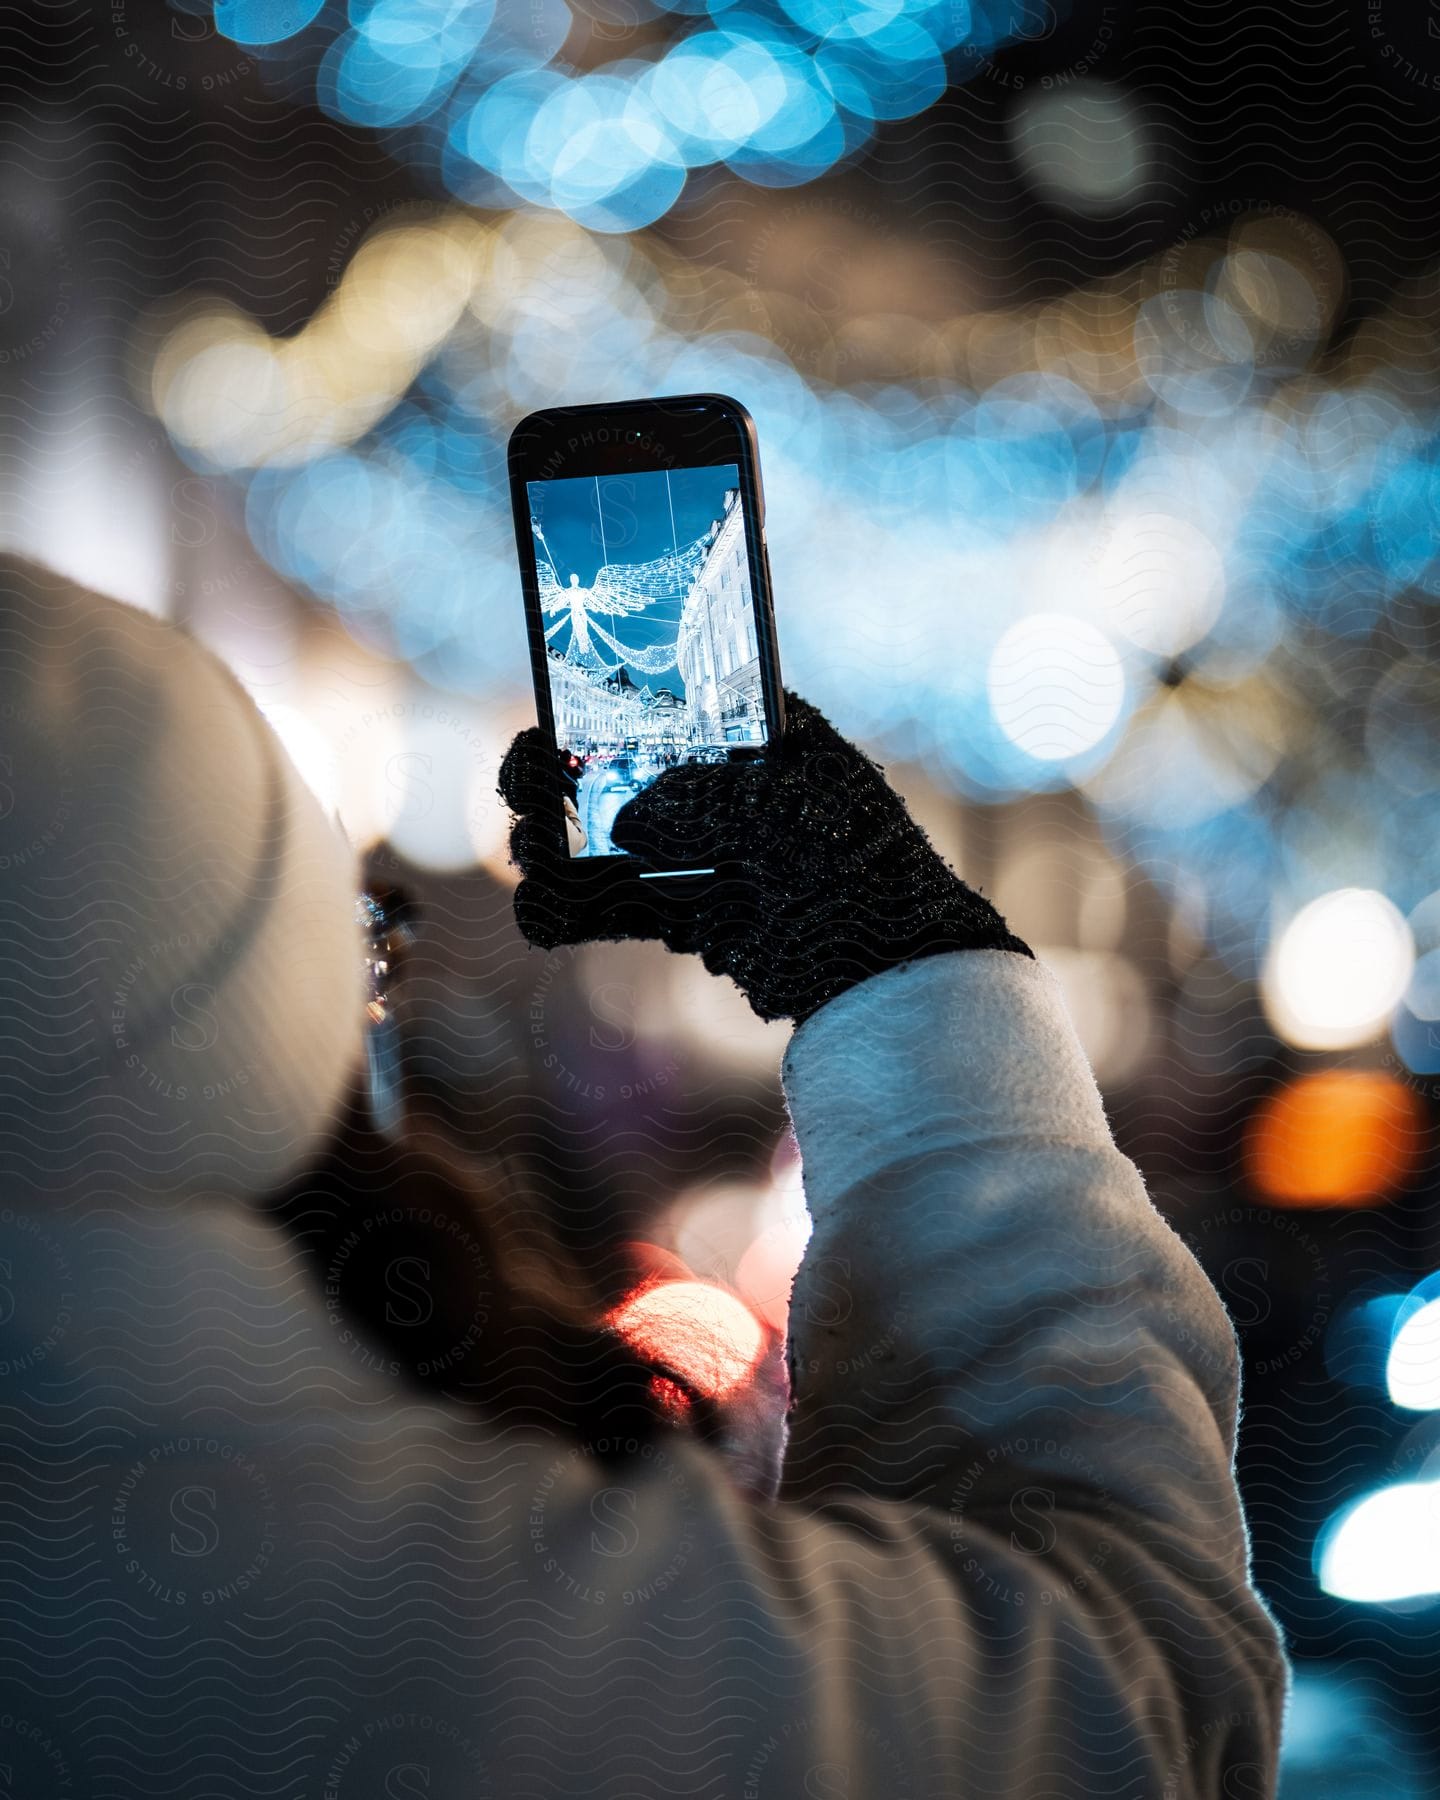 Stock photo of a woman wearing winter clothes holds up her cellphone to take a picture of holiday lights in the city